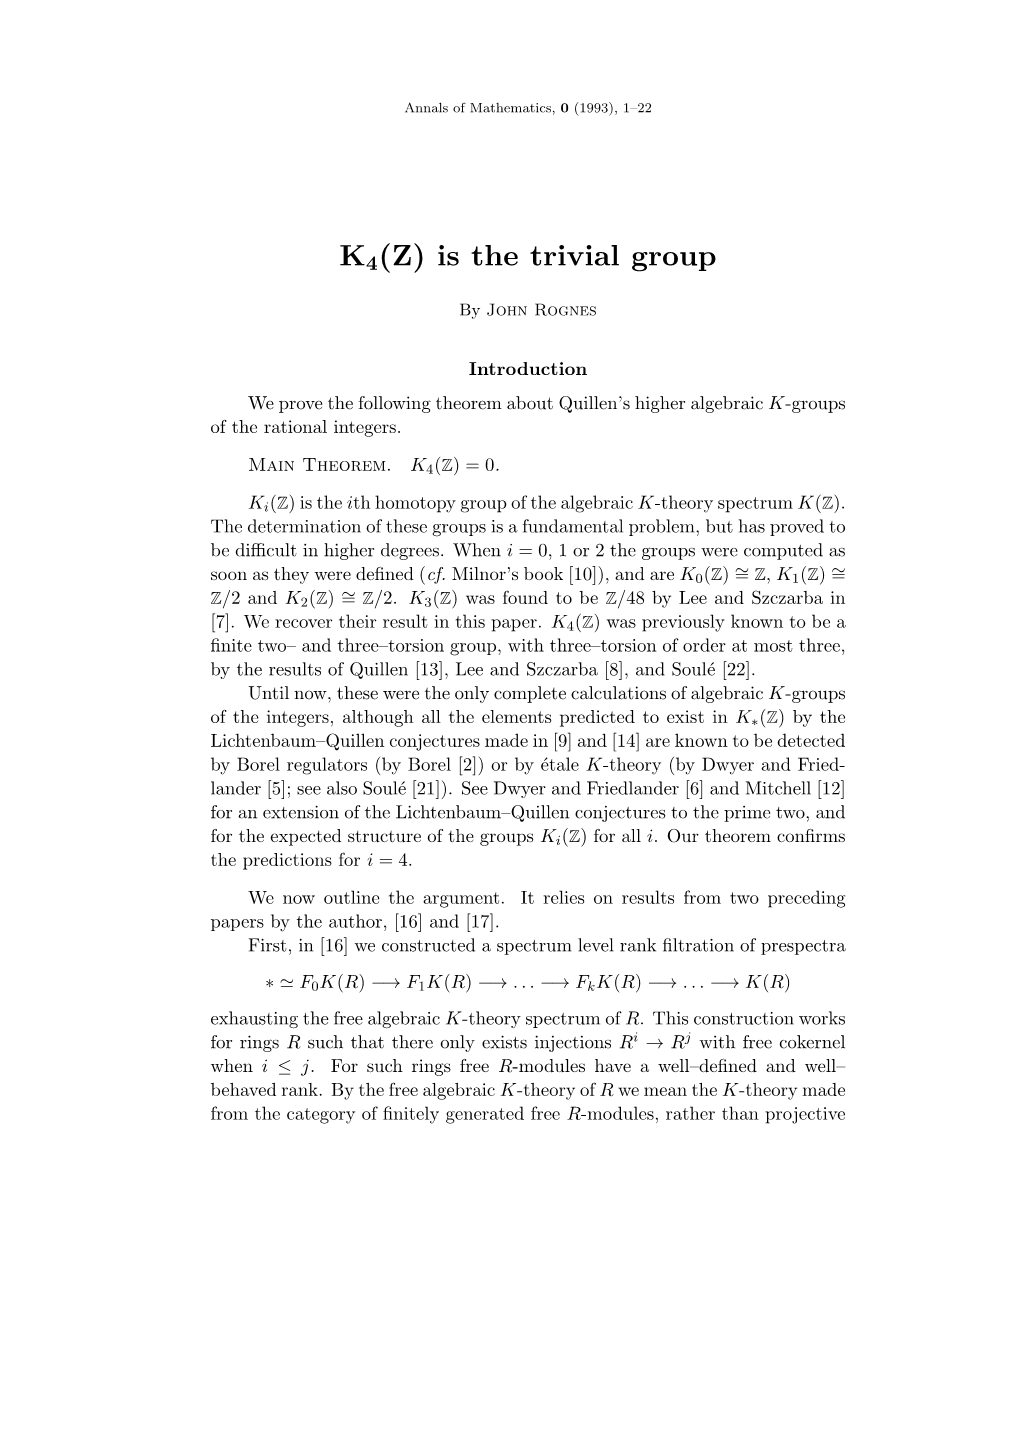 K4(Z) Is the Trivial Group